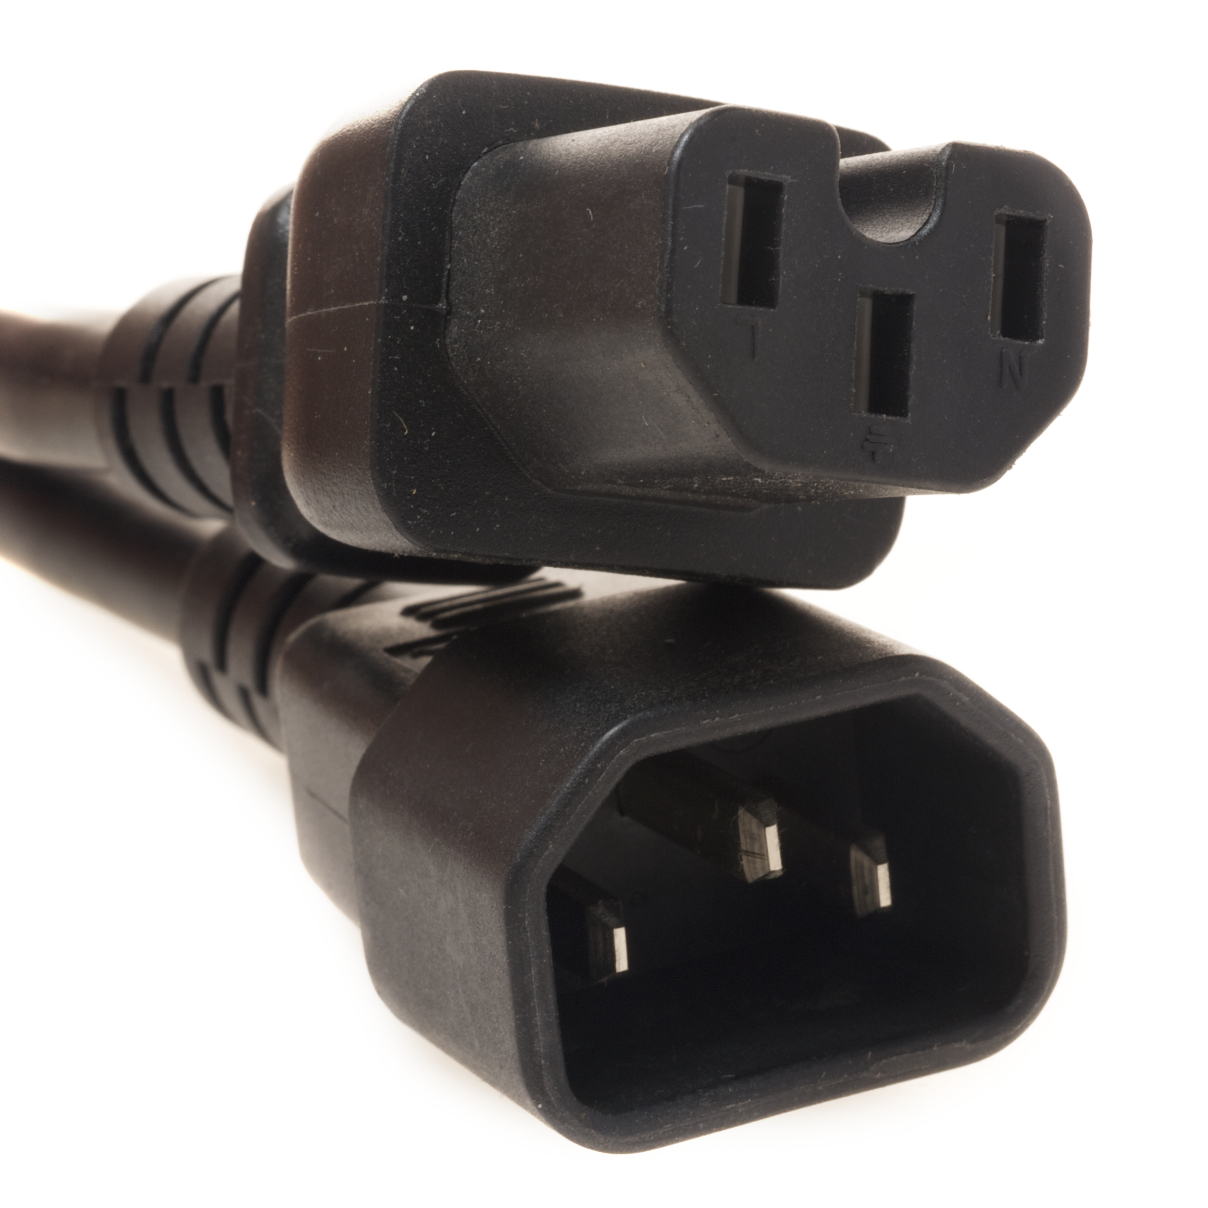 15 Amp 6' IEC Cable, Compact Power Accessories